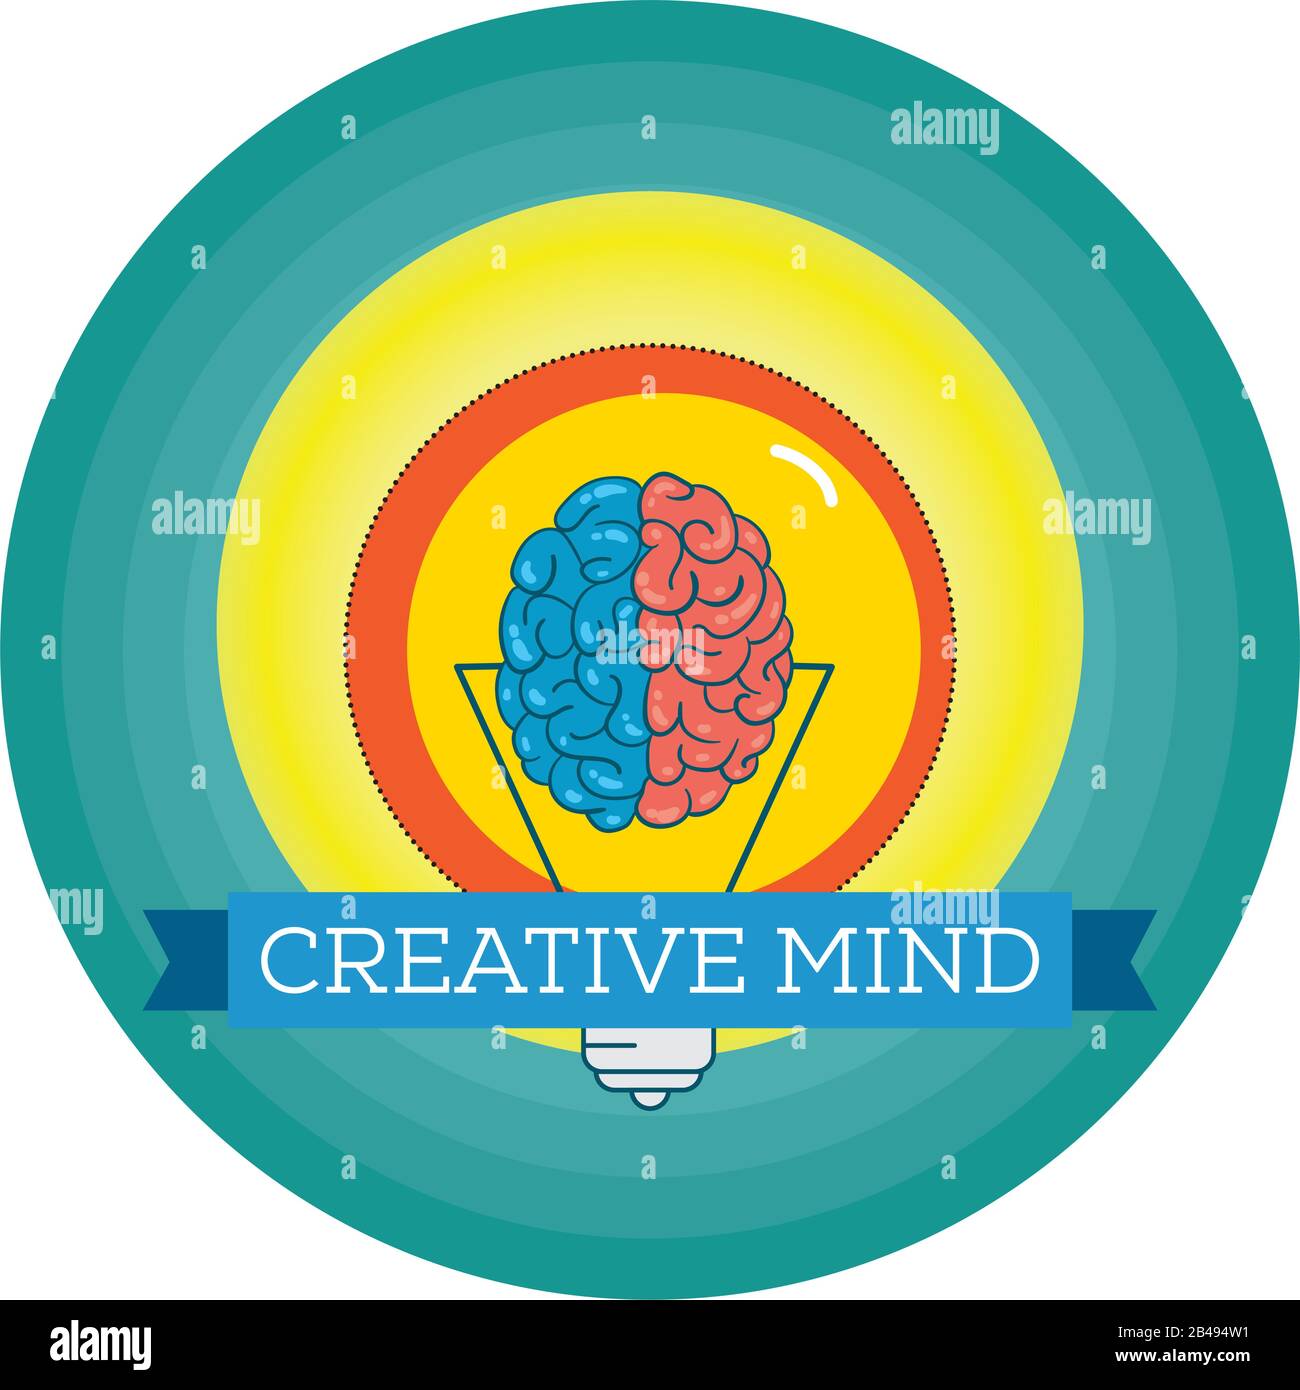 Illustration of creative mind brain , with nice background vector Stock Vector